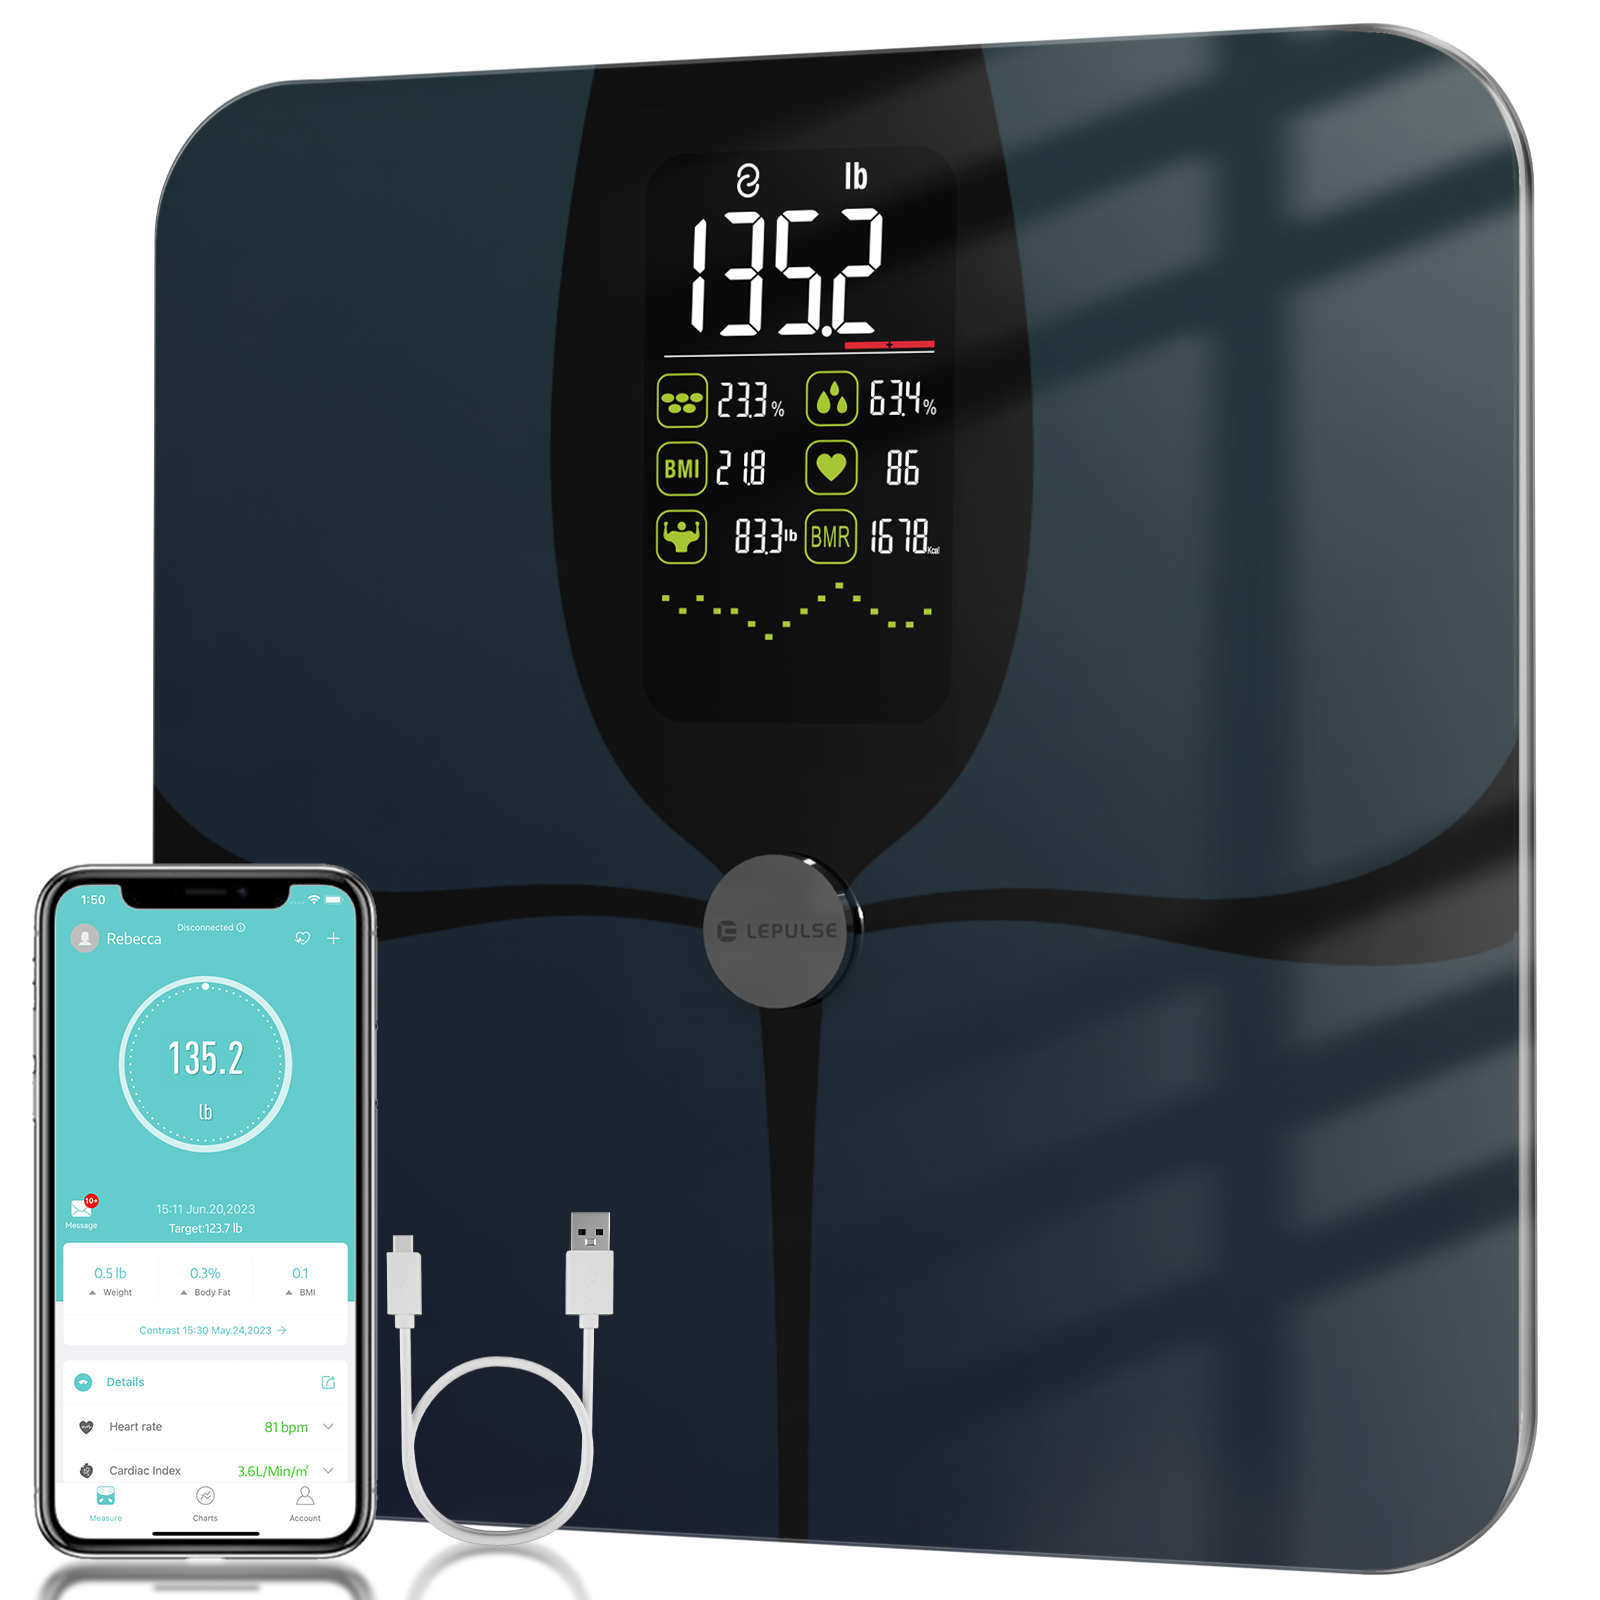 Lescale F4 Pro by Lepulse, smart body weight and fat tracking